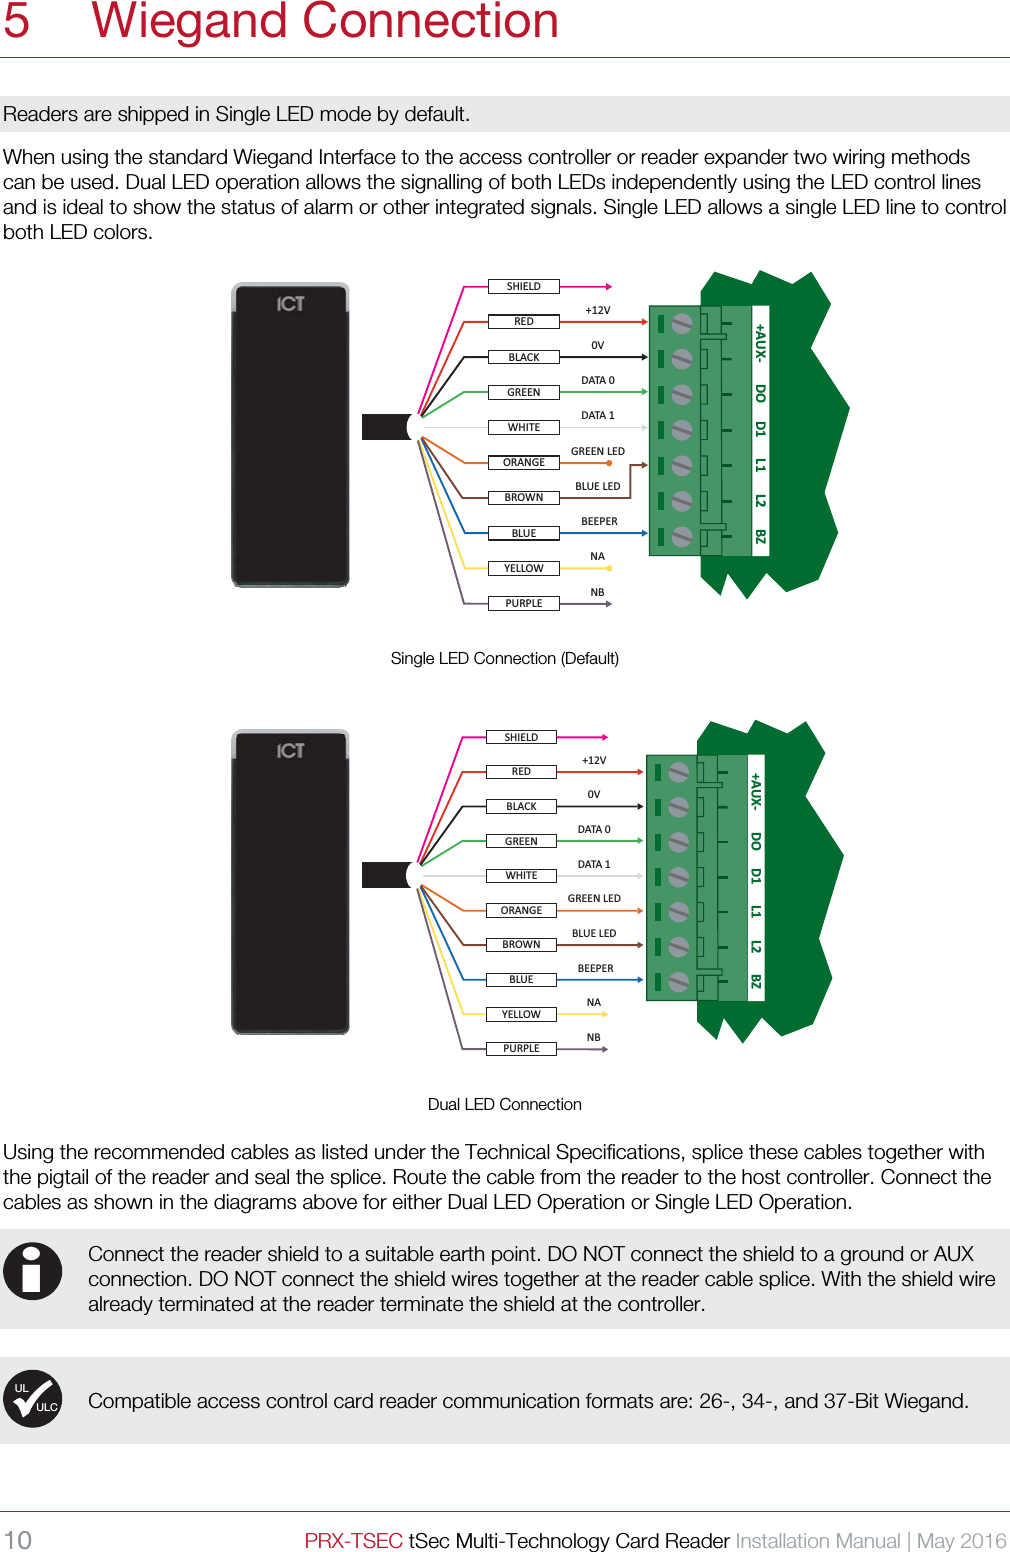 10 PRX-TSEC tSec Multi-Technology Card Reader Installation Manual | May 2016    5 Wiegand Connection Readers are shipped in Single LED mode by default. When using the standard Wiegand Interface to the access controller or reader expander two wiring methods can be used. Dual LED operation allows the signalling of both LEDs independently using the LED control lines and is ideal to show the status of alarm or other integrated signals. Single LED allows a single LED line to control both LED colors.  YELLOWPURPLEORANGEWHITEREDGREENBLACKBROWNBLUESHIELD+12V0VDATA 0DATA 1GREEN LEDBLUE LEDBEEPERNANB+AUX- DO L2D1 L1 BZ Single LED Connection (Default)  +AUX- DO L2D1 L1 BZYELLOWPURPLEORANGEWHITEREDGREENBLACKBROWNBLUESHIELD+12V0VDATA 0DATA 1GREEN LEDBLUE LEDBEEPERNANB Dual LED Connection Using the recommended cables as listed under the Technical Specifications, splice these cables together with the pigtail of the reader and seal the splice. Route the cable from the reader to the host controller. Connect the cables as shown in the diagrams above for either Dual LED Operation or Single LED Operation.   Connect the reader shield to a suitable earth point. DO NOT connect the shield to a ground or AUX connection. DO NOT connect the shield wires together at the reader cable splice. With the shield wire already terminated at the reader terminate the shield at the controller.    Compatible access control card reader communication formats are: 26-, 34-, and 37-Bit Wiegand.    iULULC